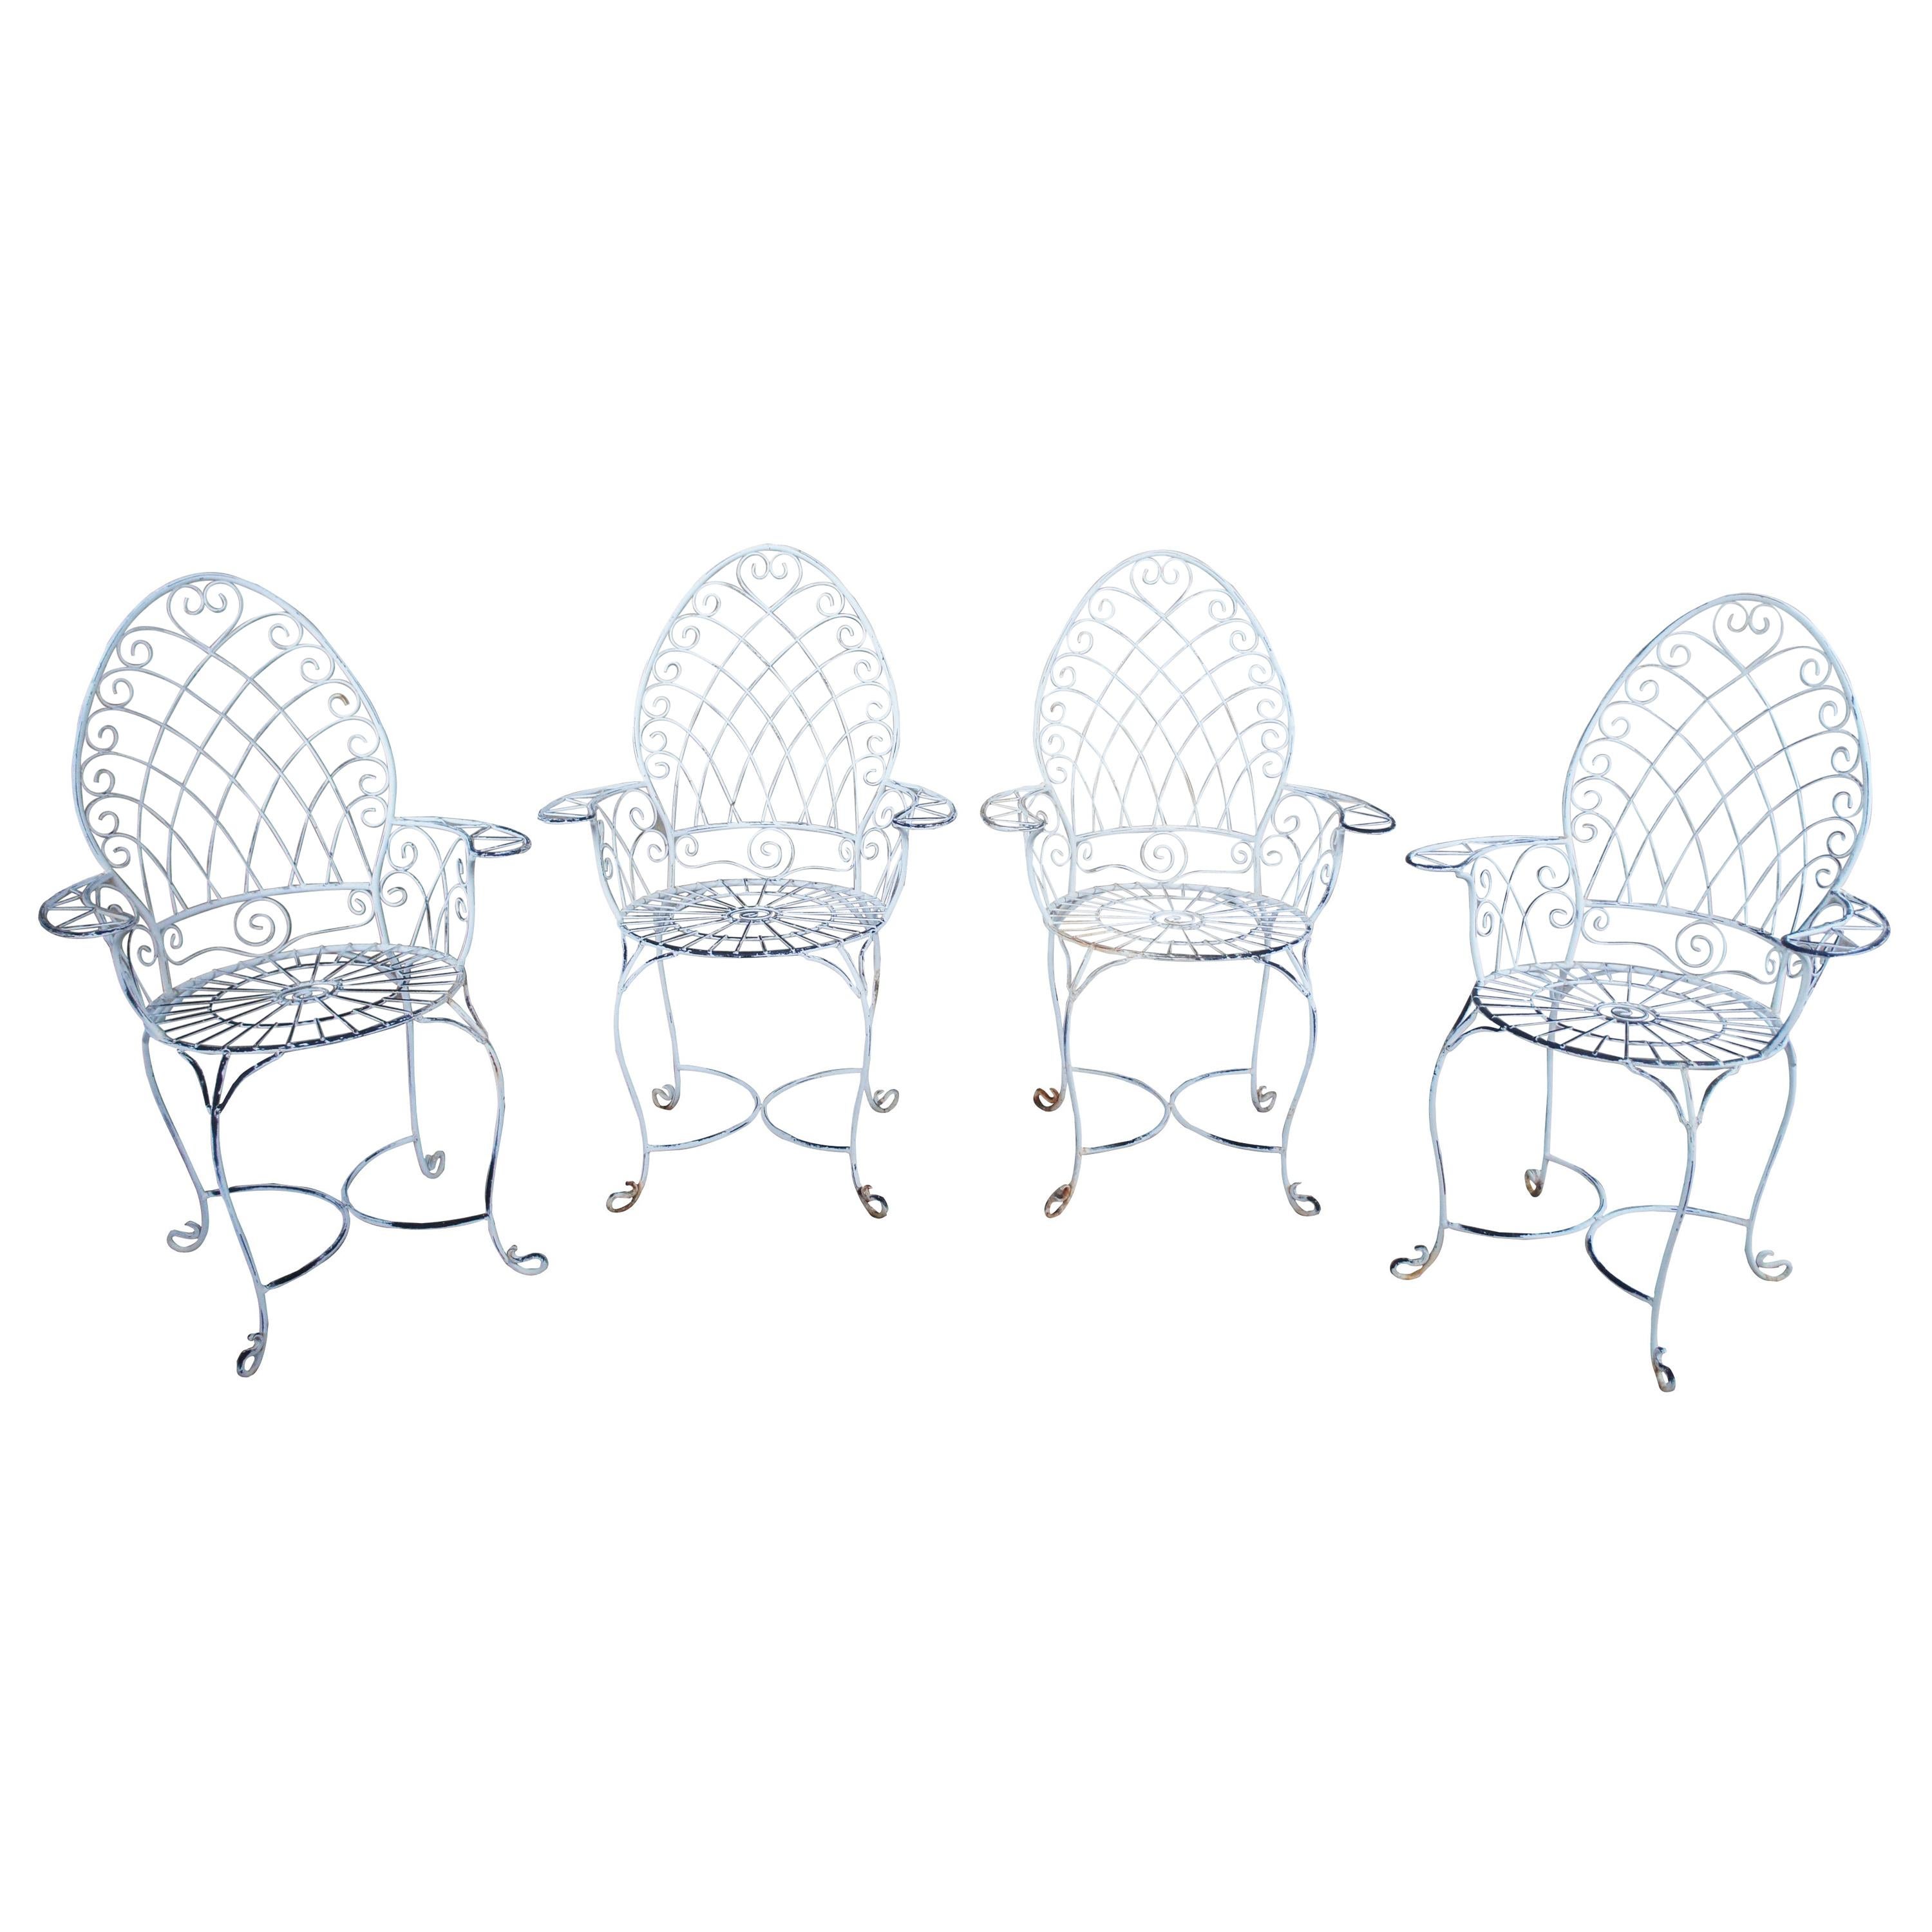 4 Vintage Wrought Iron Scrolled Patio Armchairs Ice Cream Parlor Chic